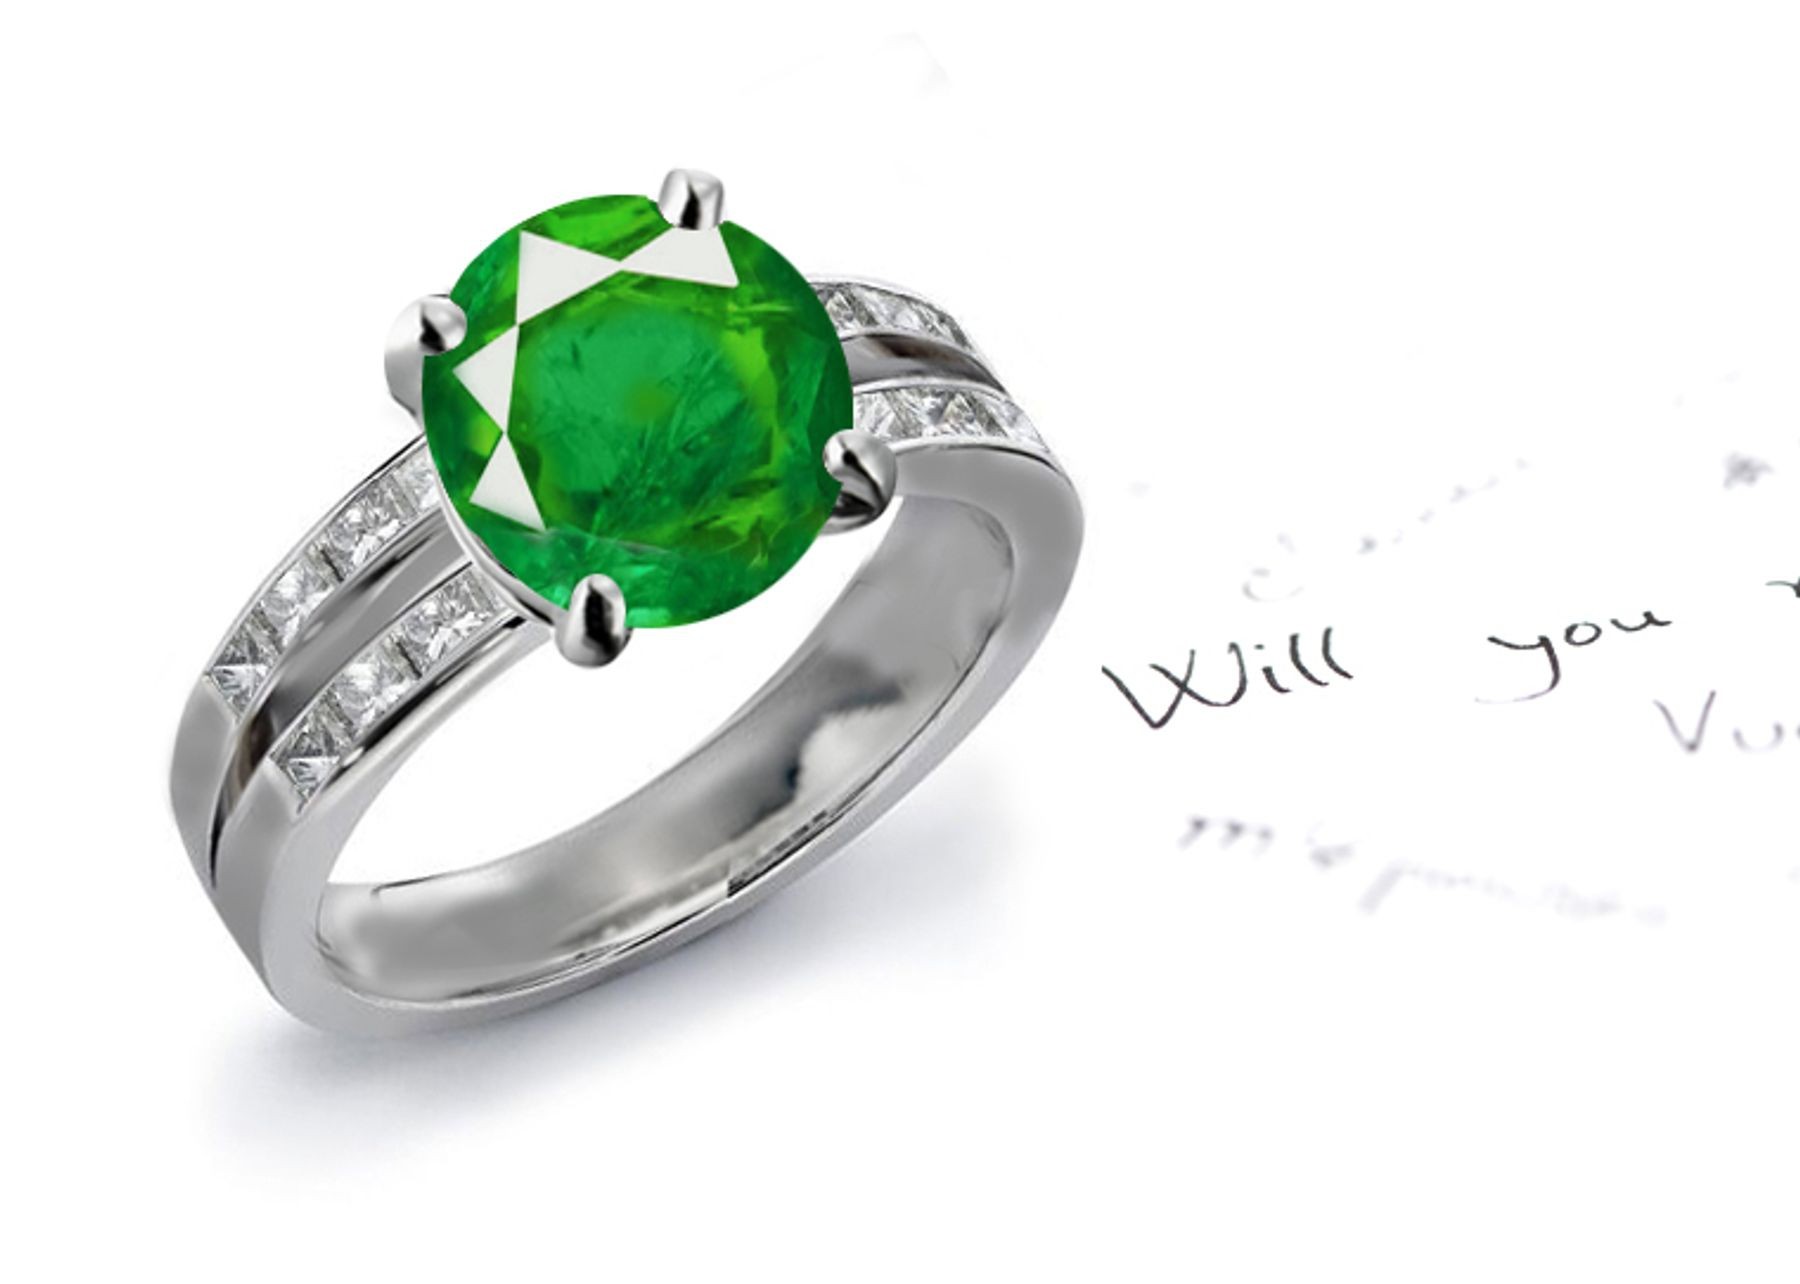 Sets Made Up As Desired: Perfect Channel Set Emerald Diamond Gold Ring in 14k White 